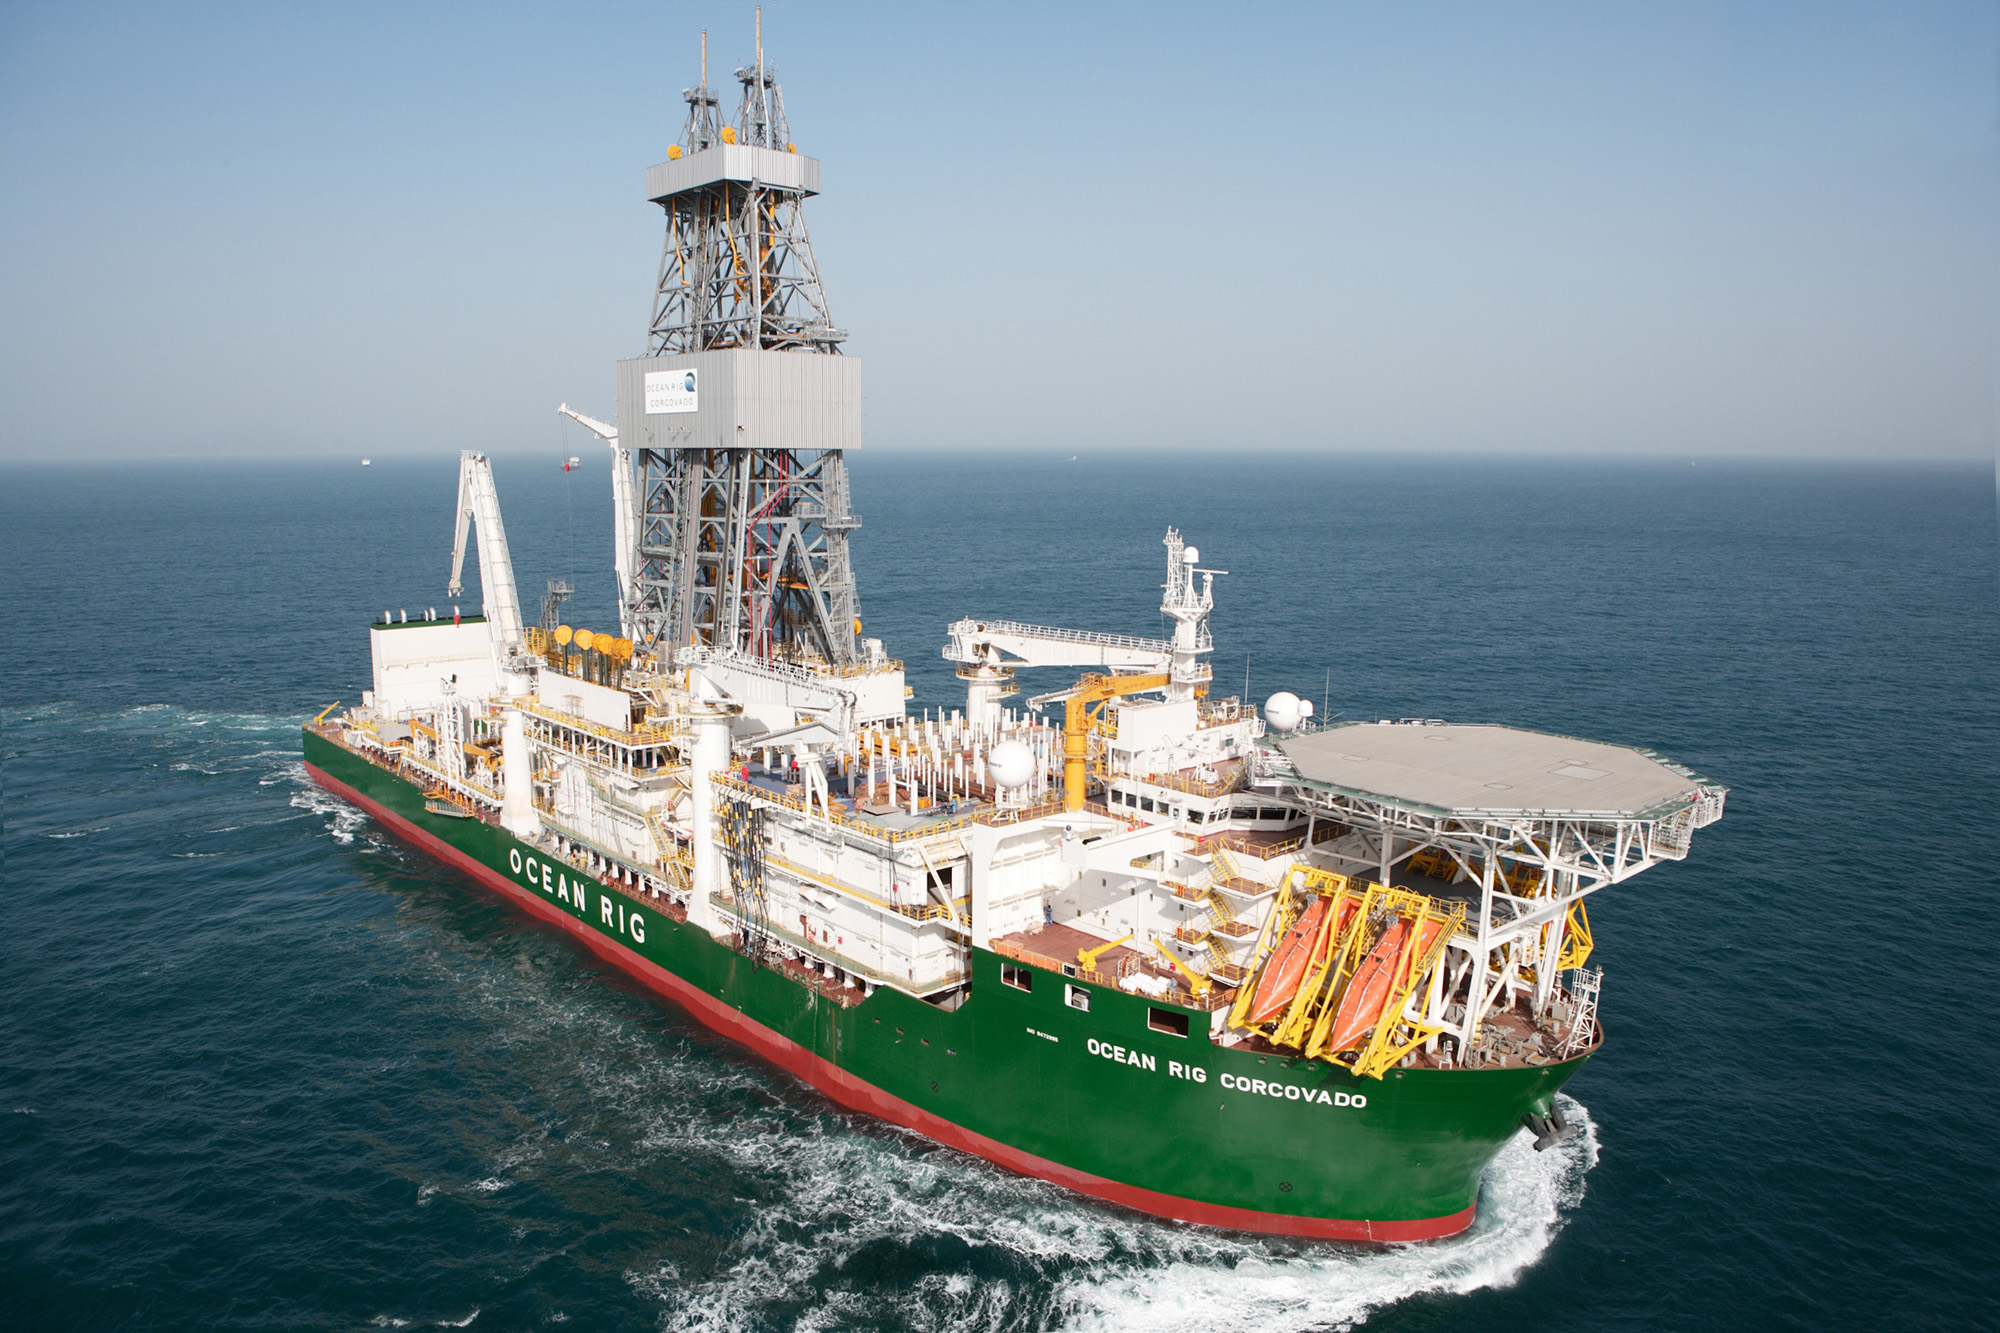 The Ocean Rig Corcovado, an open drillship owned by Ocean Rig UDW Inc., which was used by Cairn Energy Plc in their offshore operations in Greenland. The U.S. Geological Survey estimates there could be as much as 50 billion barrels of oil and gas beneath Greenland’s waters.